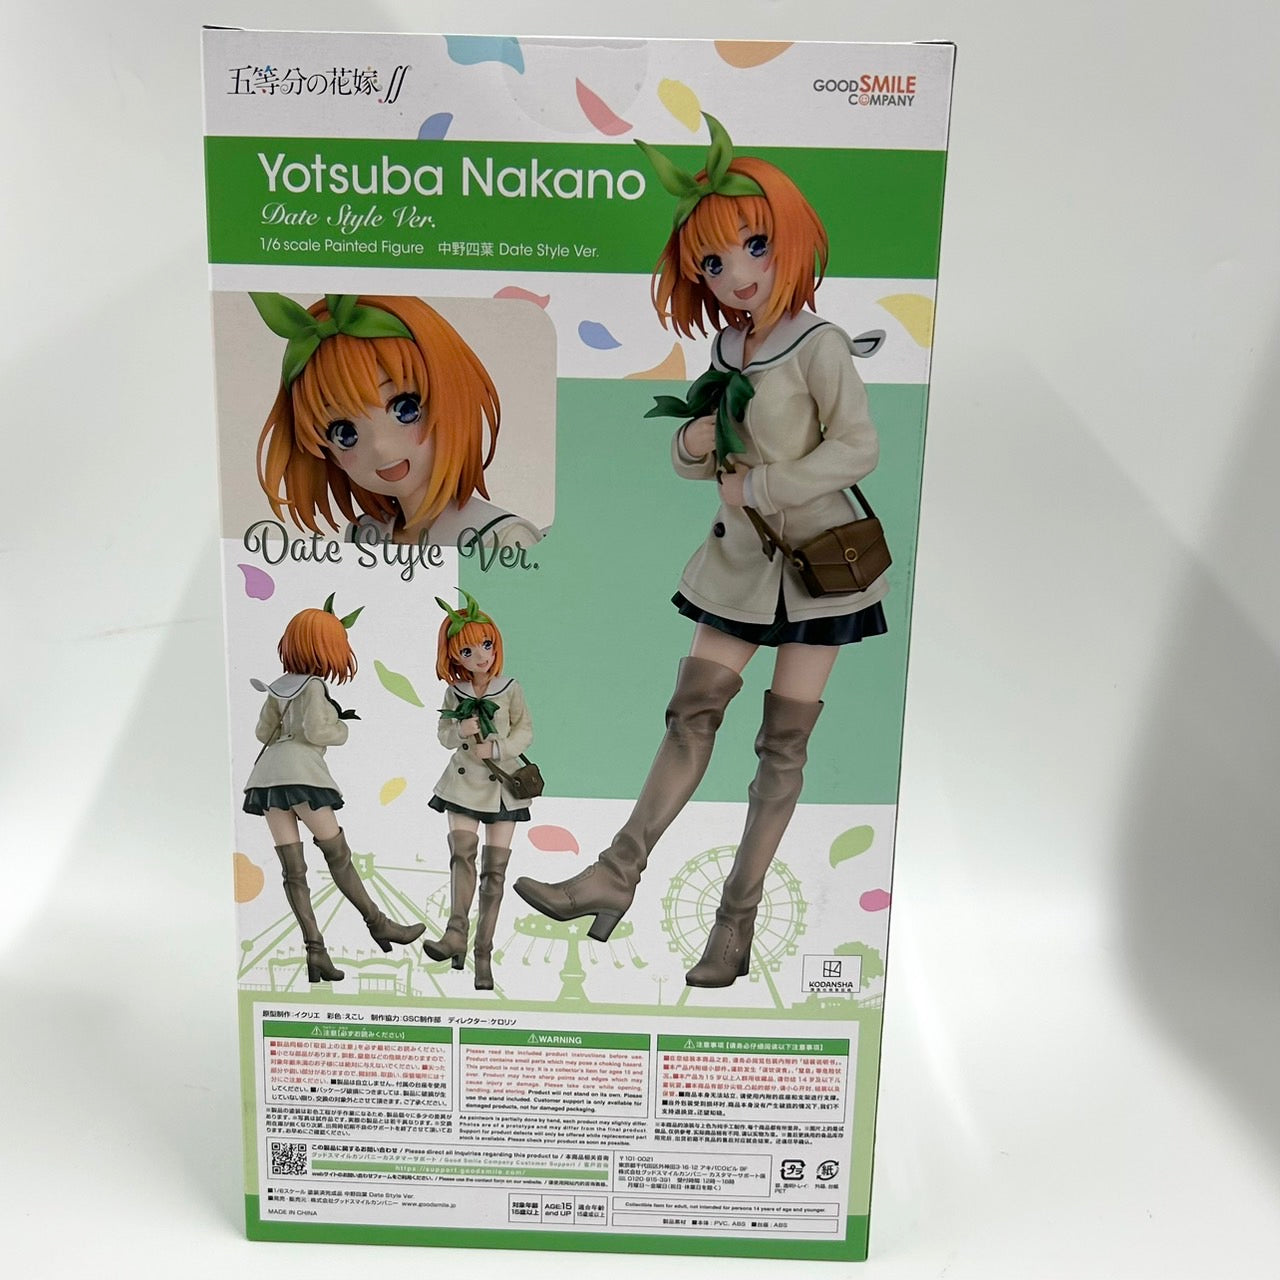 Good Smile Company Yotsuba Nakano Date Style The Quintessential Quintuplets∬ 1/6 scale painted finished product